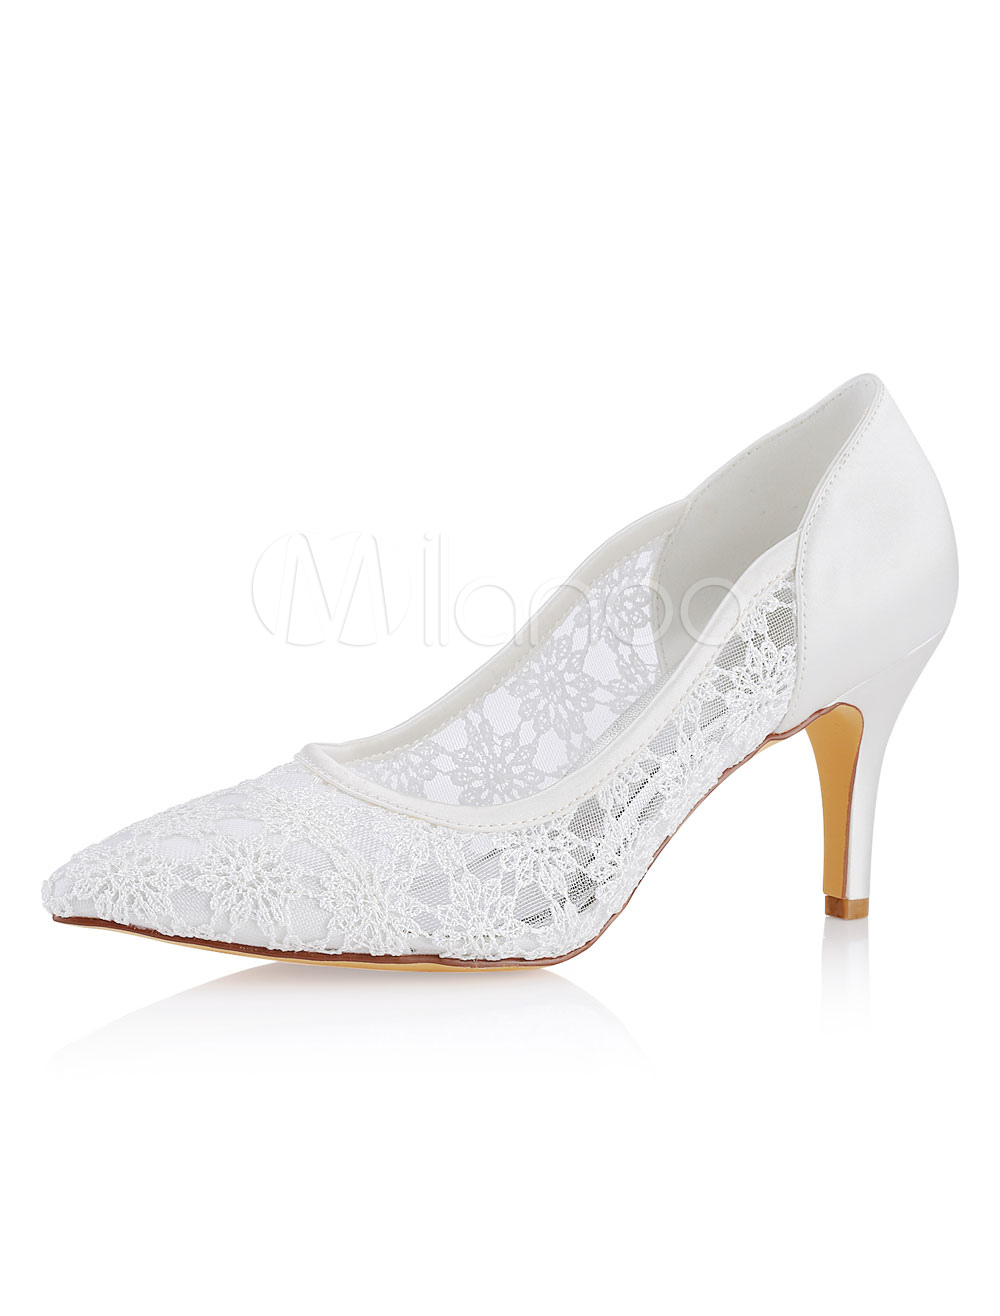 Lace Wedding Shoes Ivory Pointed Toe Slip On Bridal Shoes Wedding Guest ...